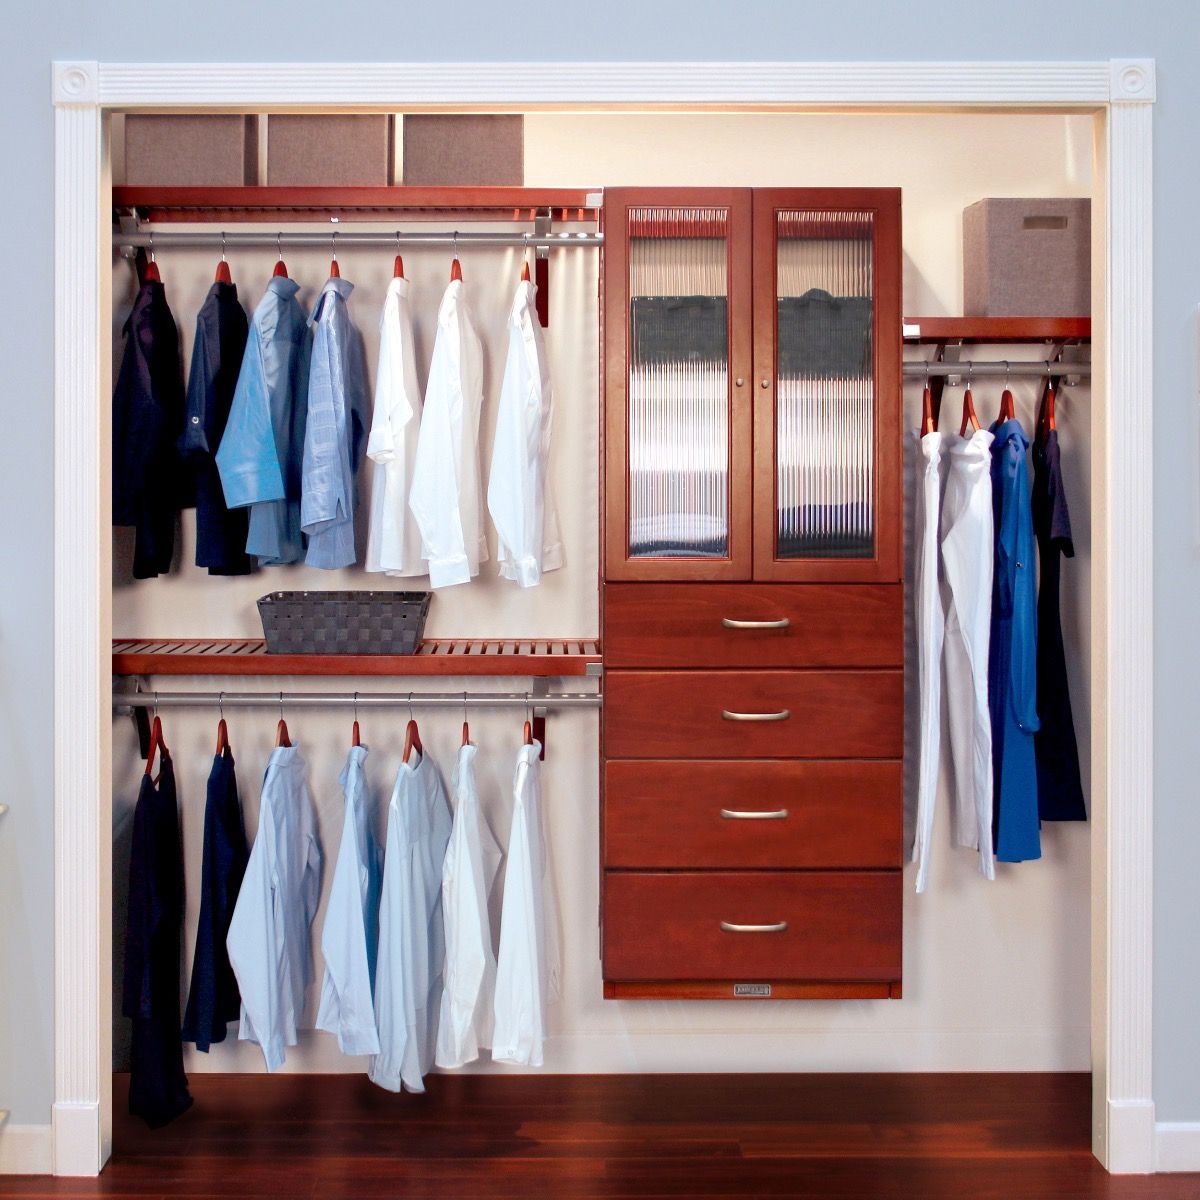 16in Deep Deluxe Closet Organizer with 4 drawers with doors